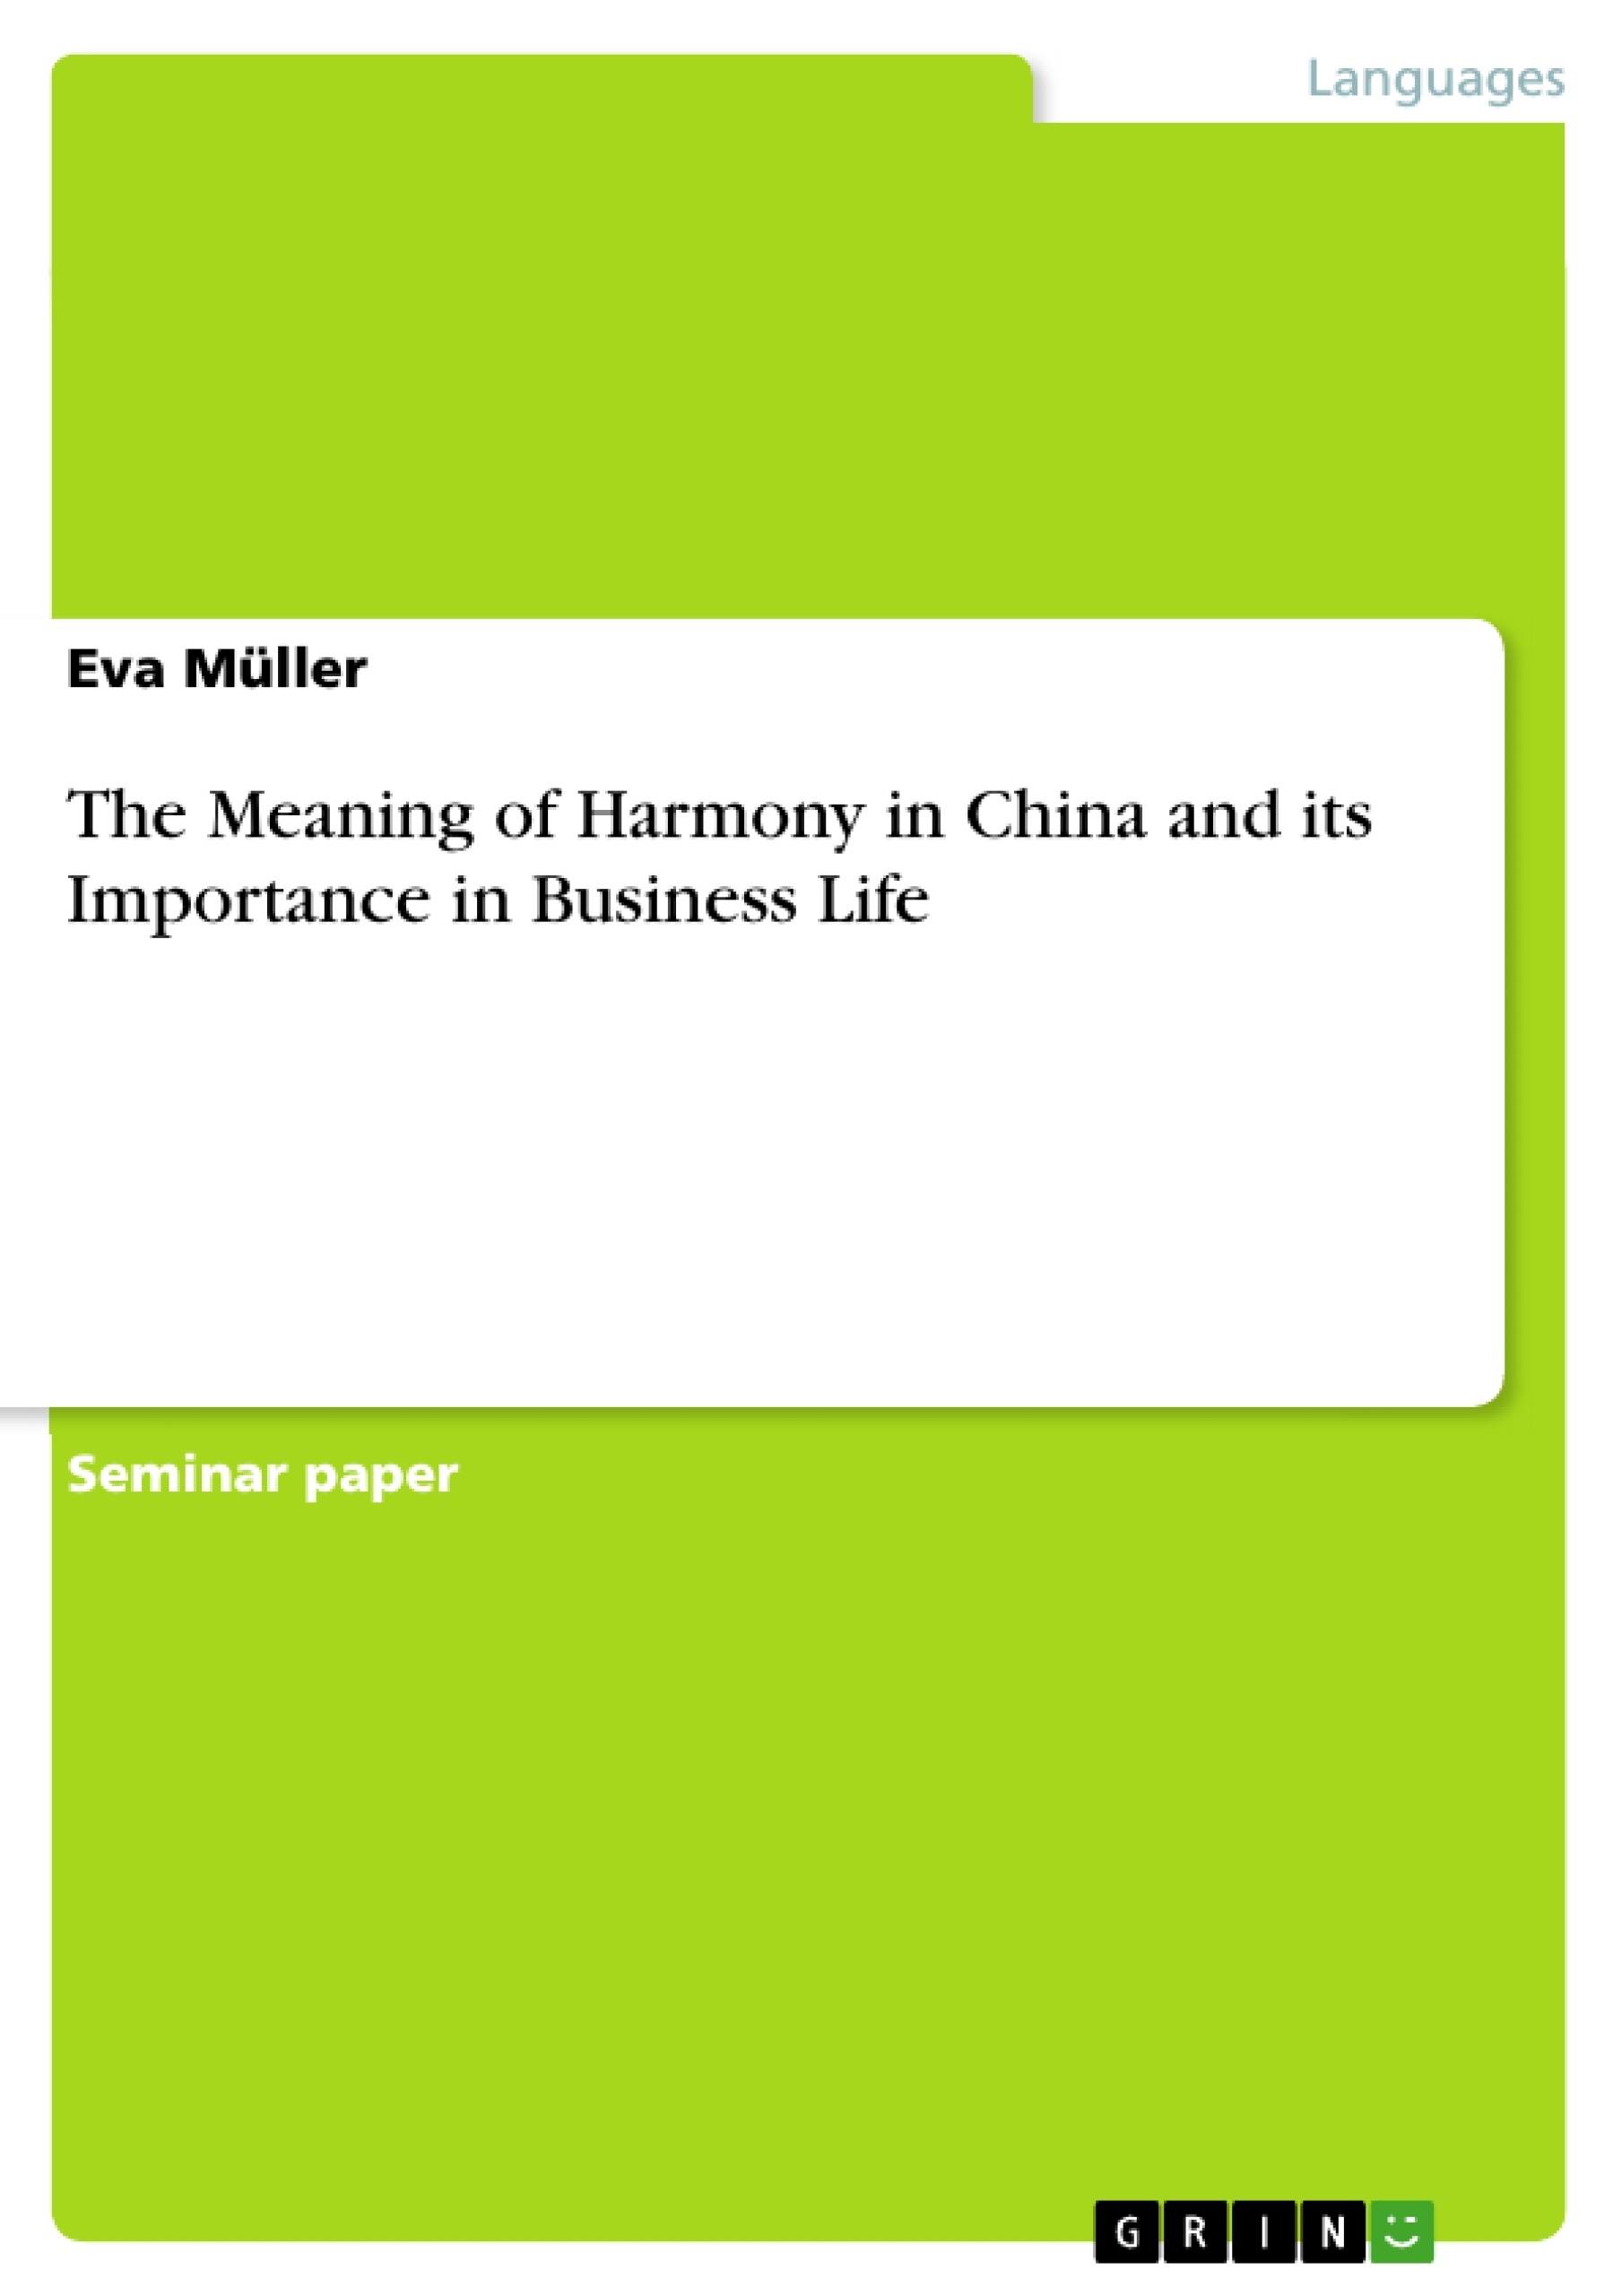 Título: The Meaning of Harmony in China and its Importance in Business Life